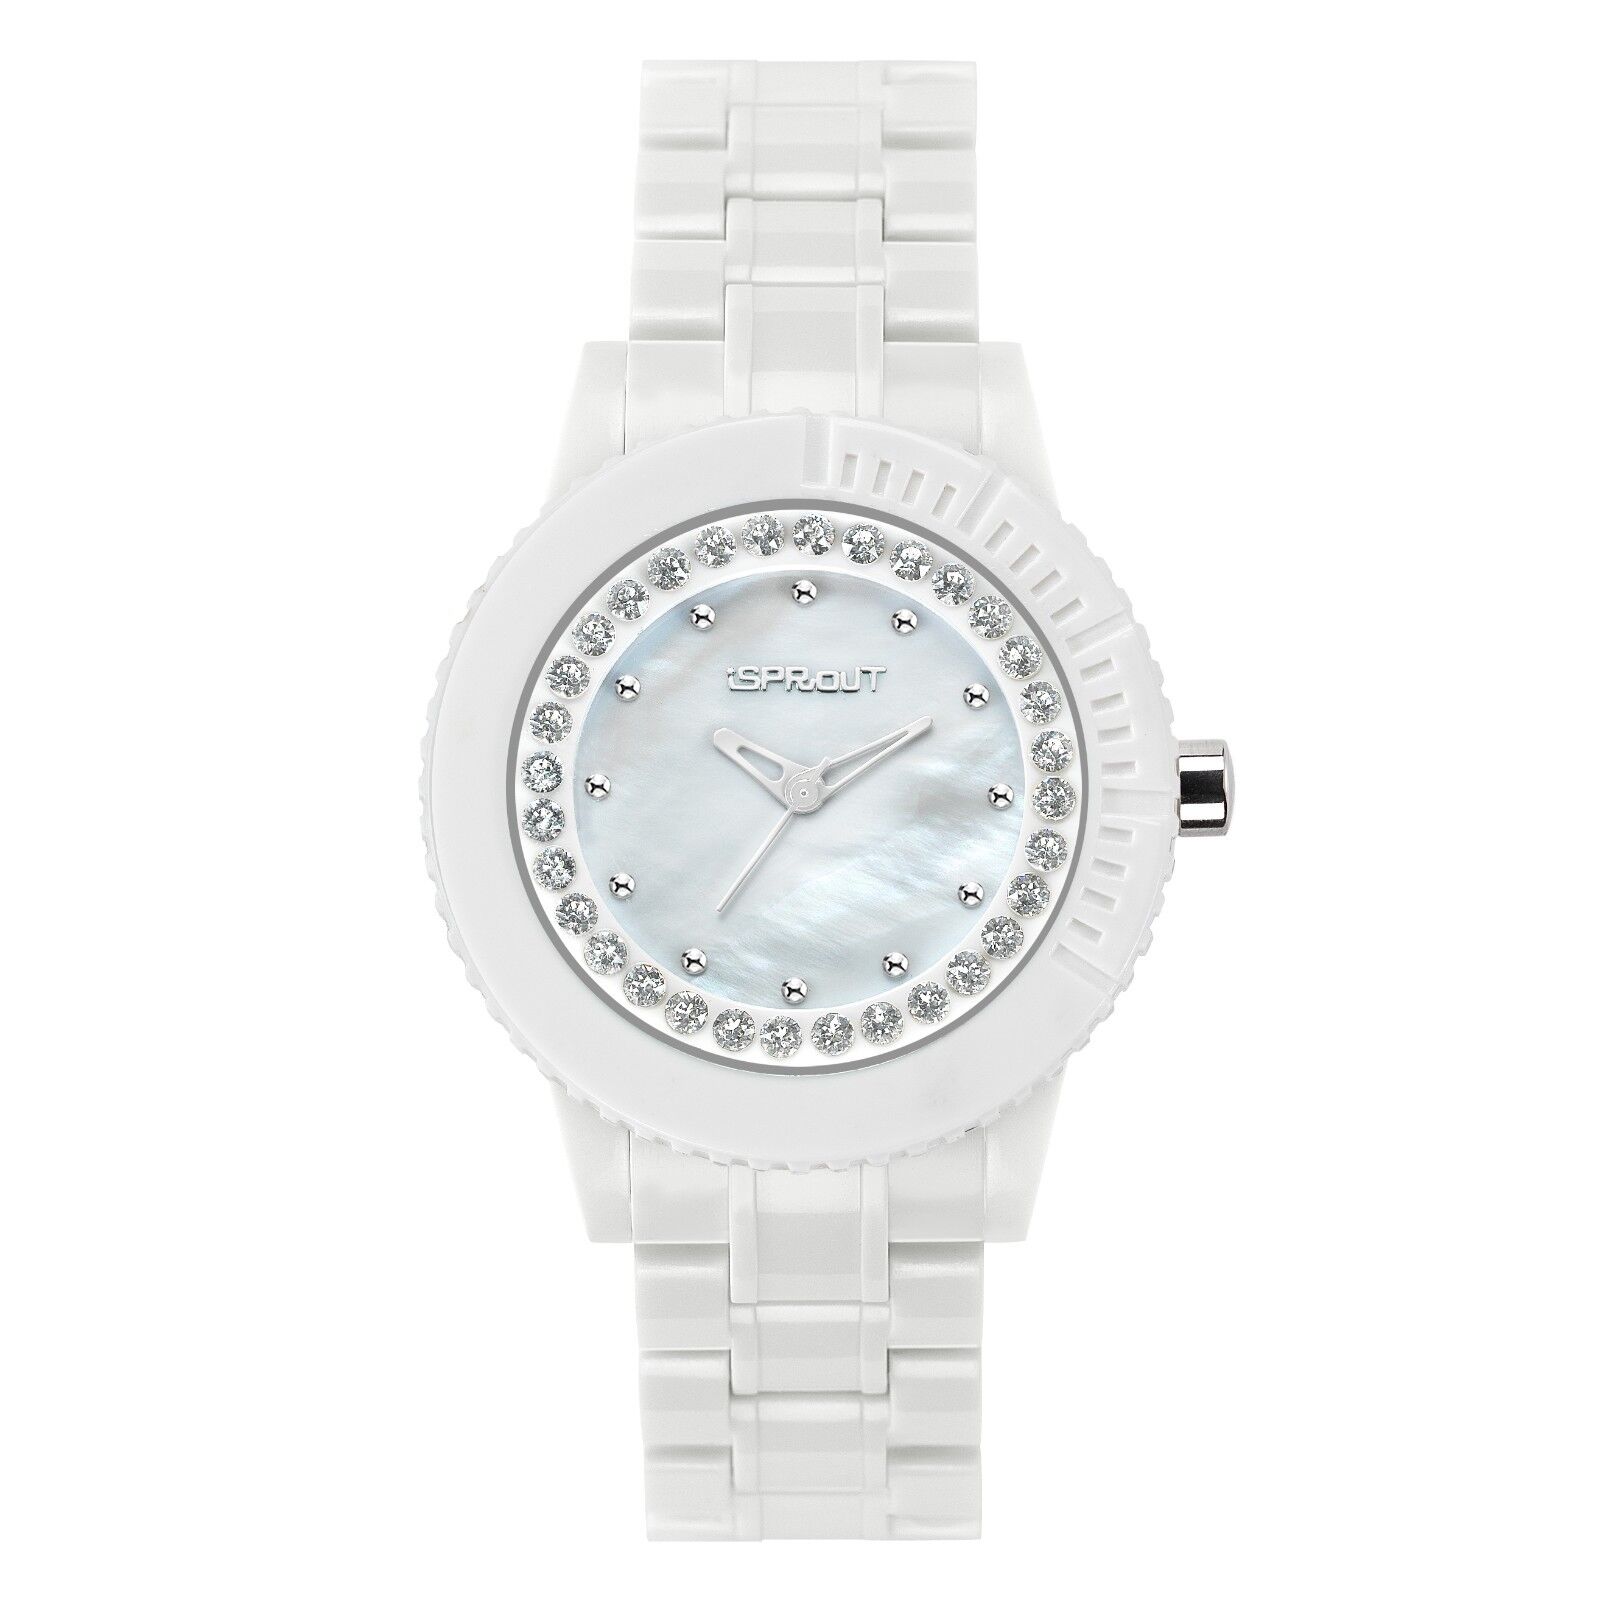 NEW-SPROUT WHITE CORN RESIN+MOP+CRYSTAL+SILVER DETAILS DIAL WATCH ST/6504MPCL,WT